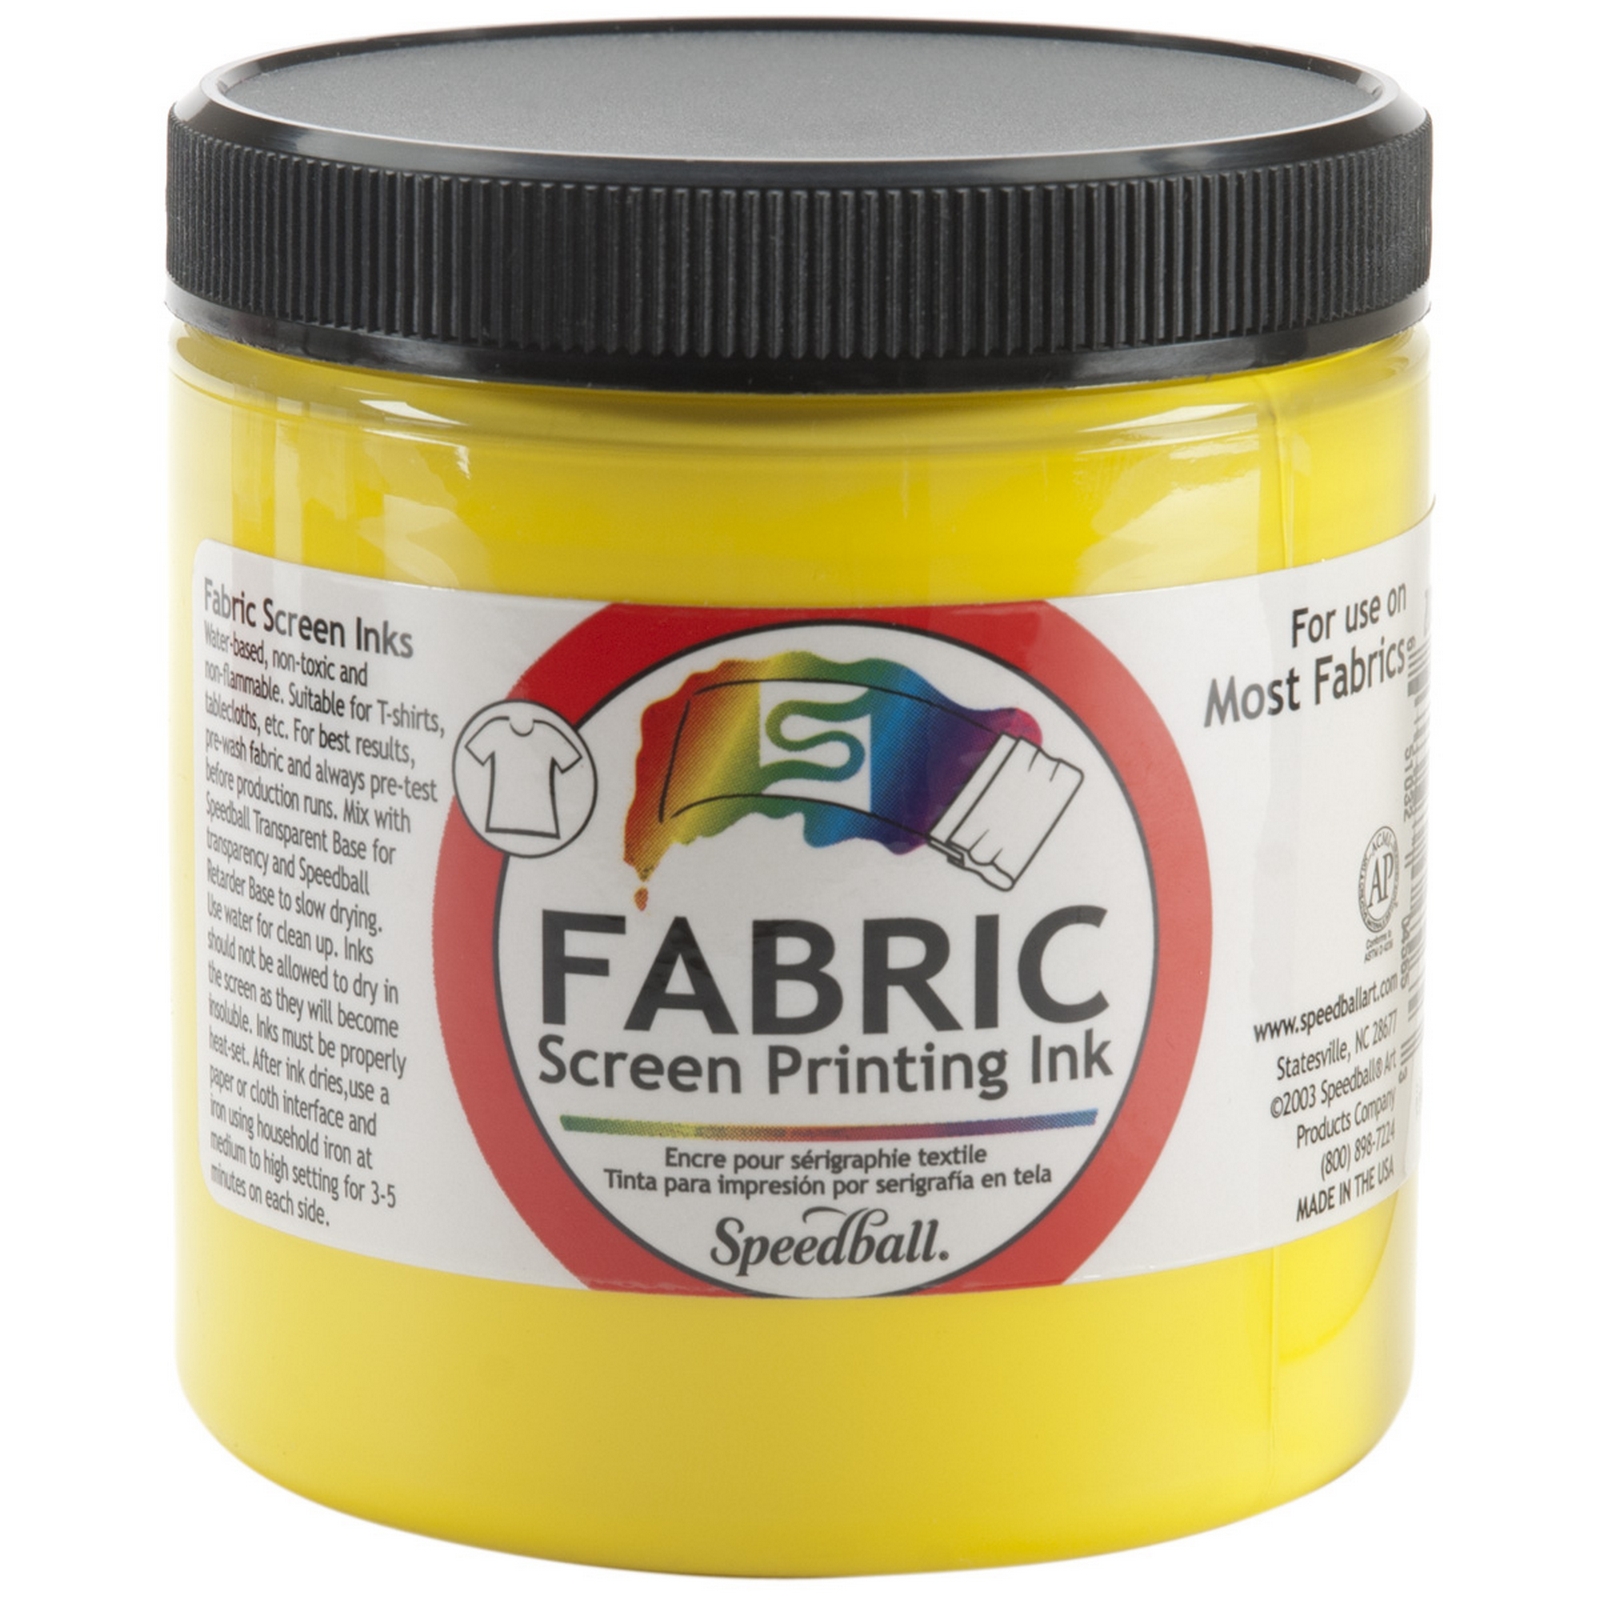 Fabric Screen Printing Ink 8 Ounces Yellow